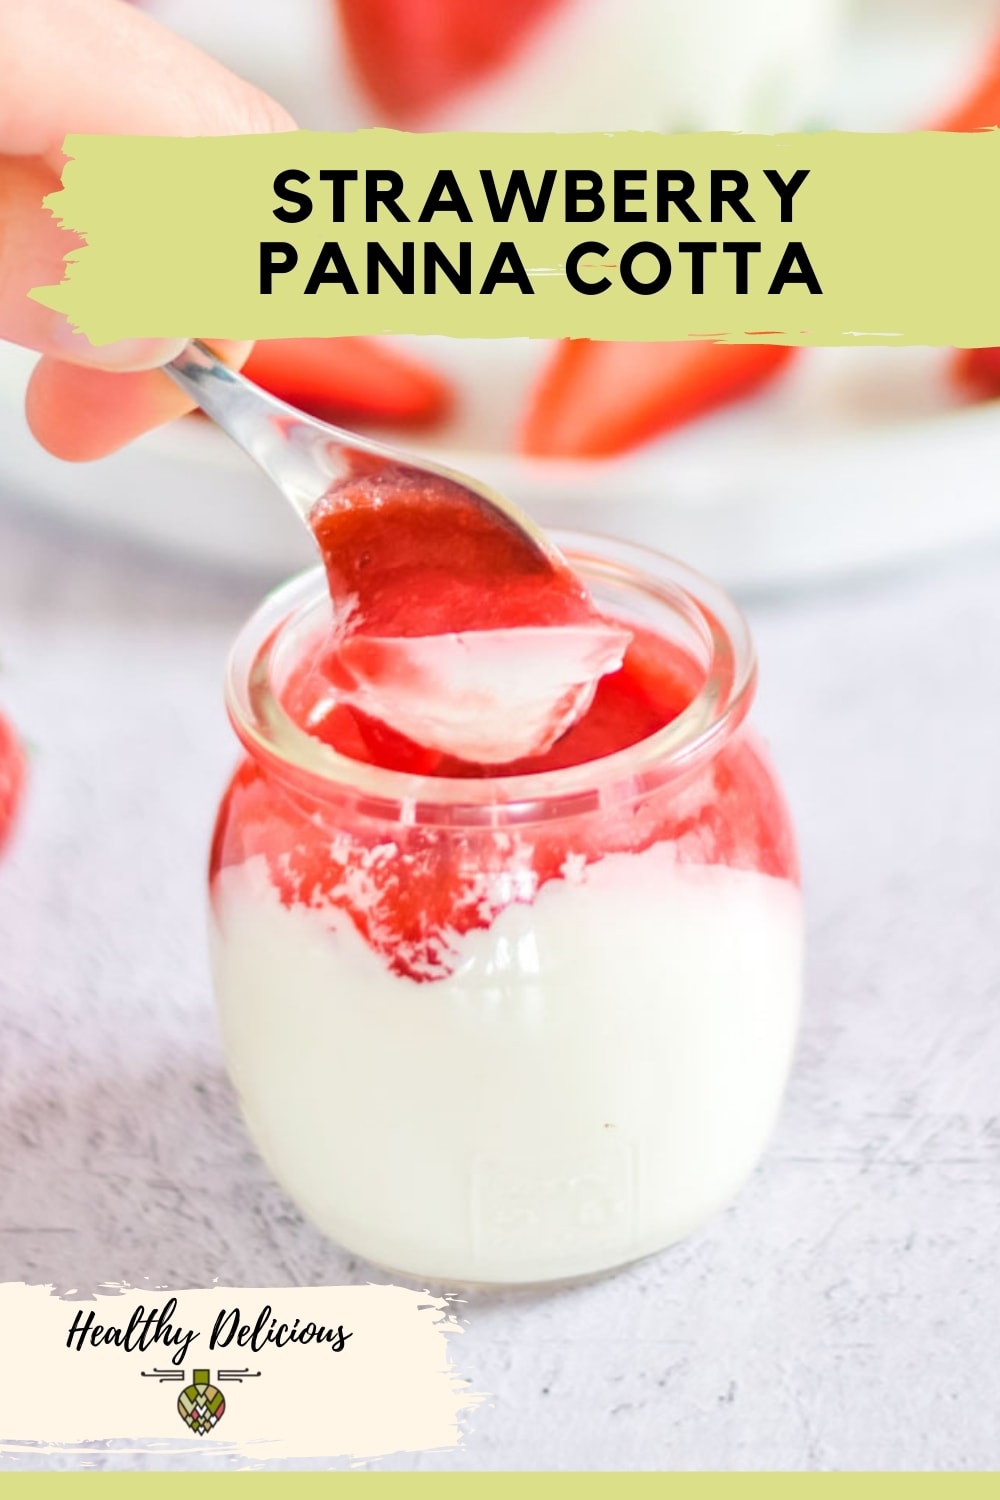 This luscious vegan panna cotta is topped with fresh strawberry sauce for a delicious dessert that adults and kids alike will gobble up! Impressive enough to serve at a dinner party, it's made with just 5 ingredients and a few minutes of active prep time. Vegan, Dairy Free, and Sugar Free! via @HealthyDelish